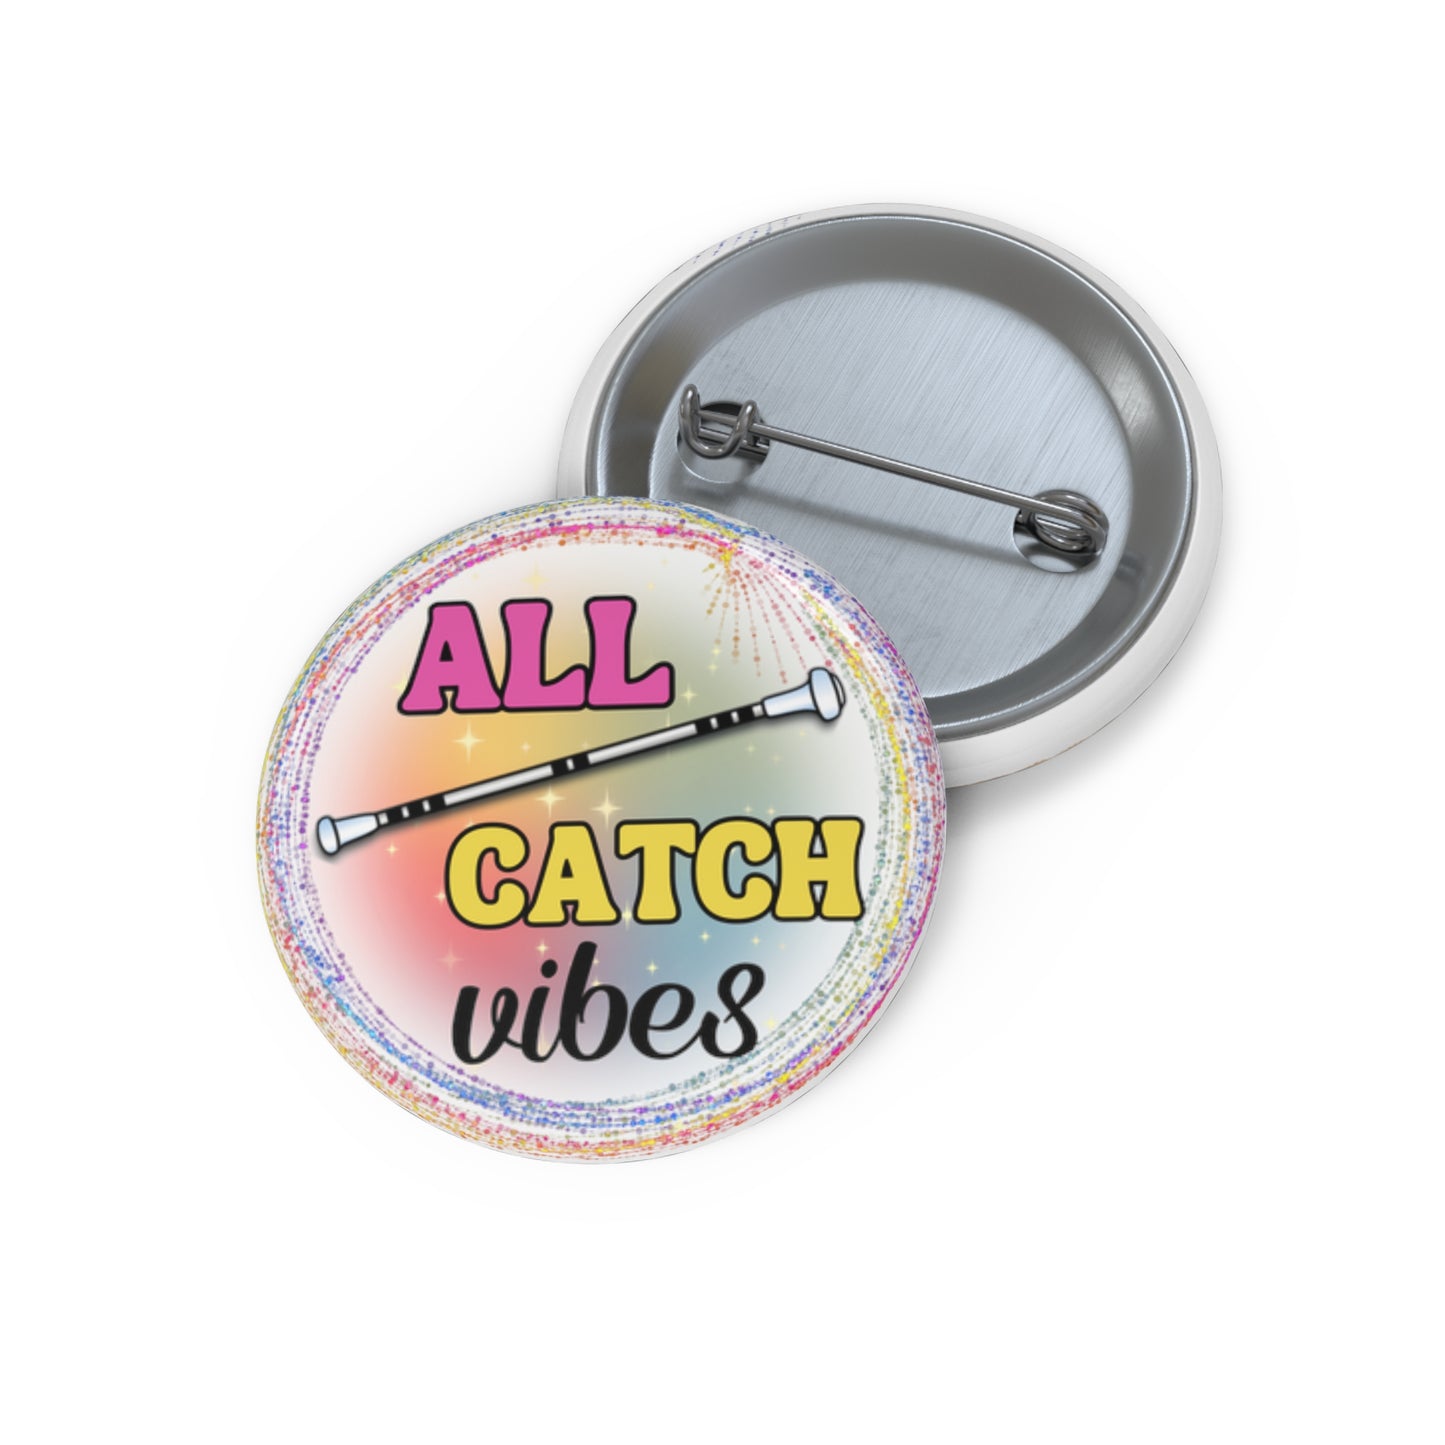 All Catch Vibes Baton Twirling Pinback Button, Competiton Gift for Baton Twirler, Recital Gift for Twirler Daughter